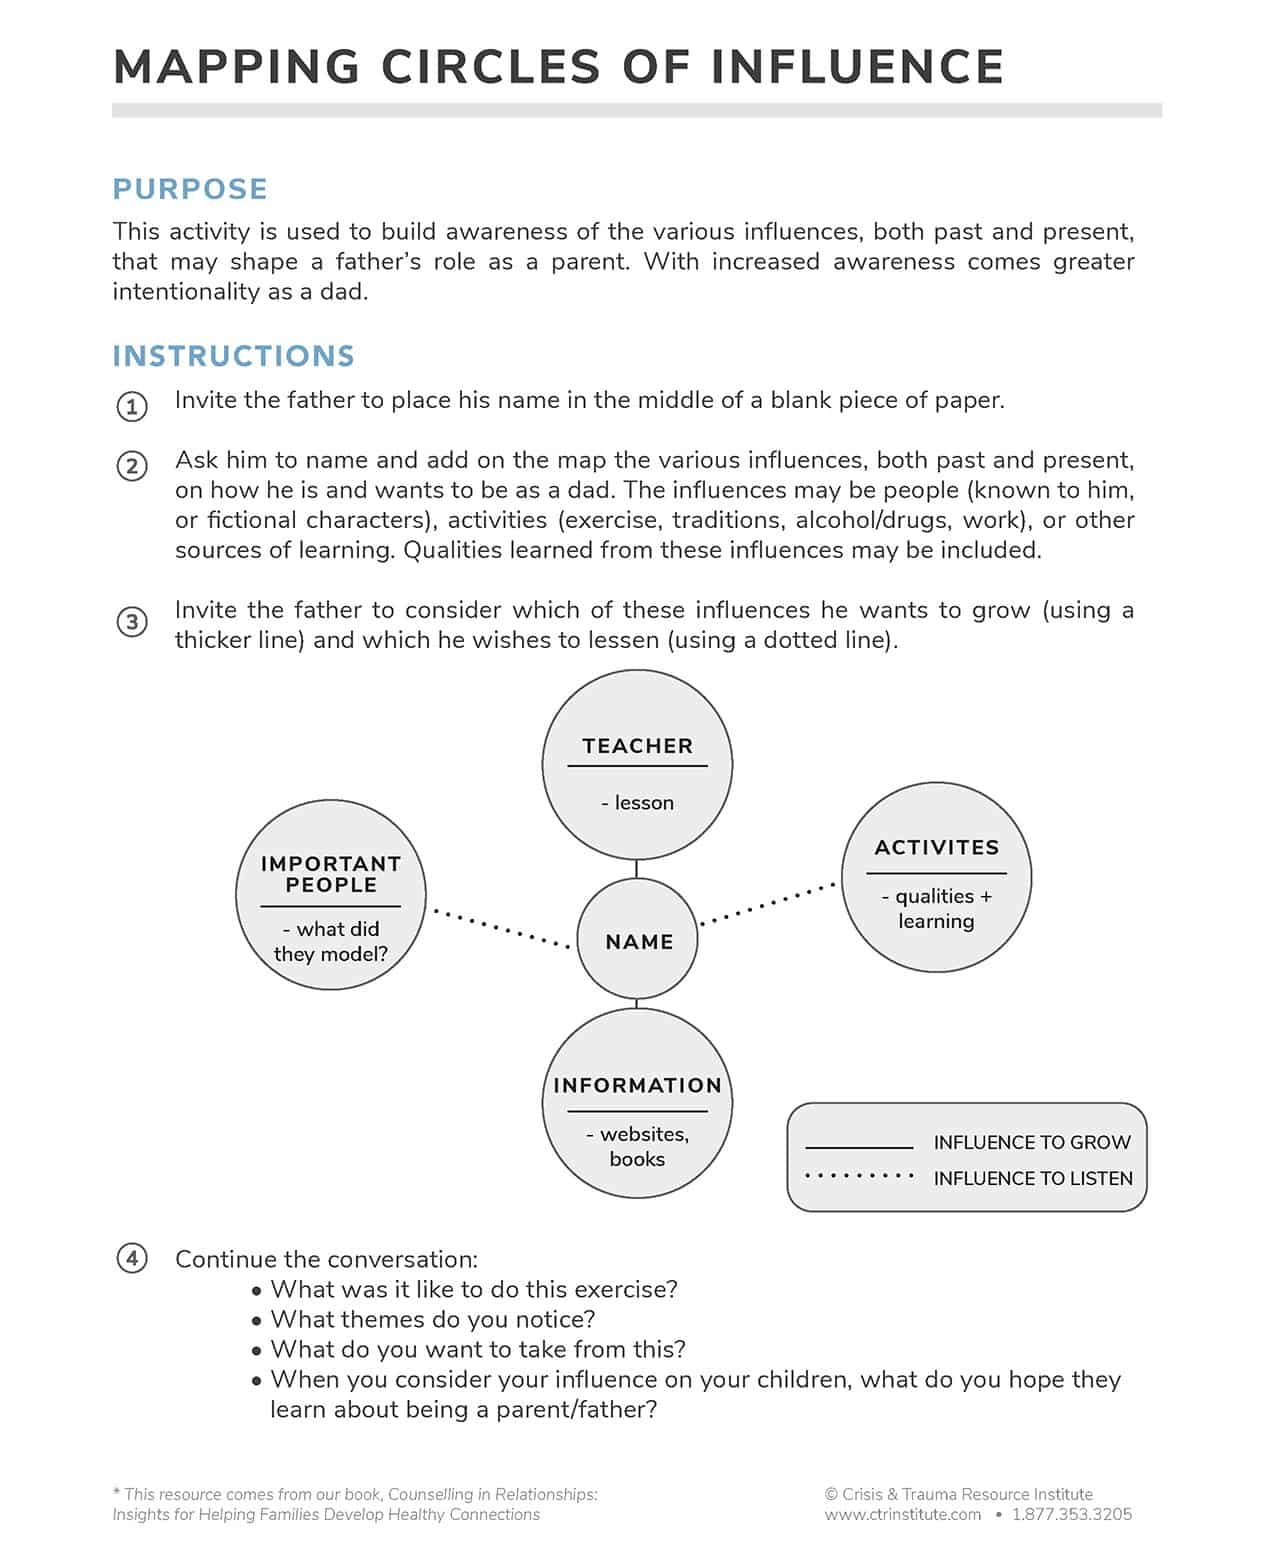 Image of Free Printable Handout Mapping Circles of Influence